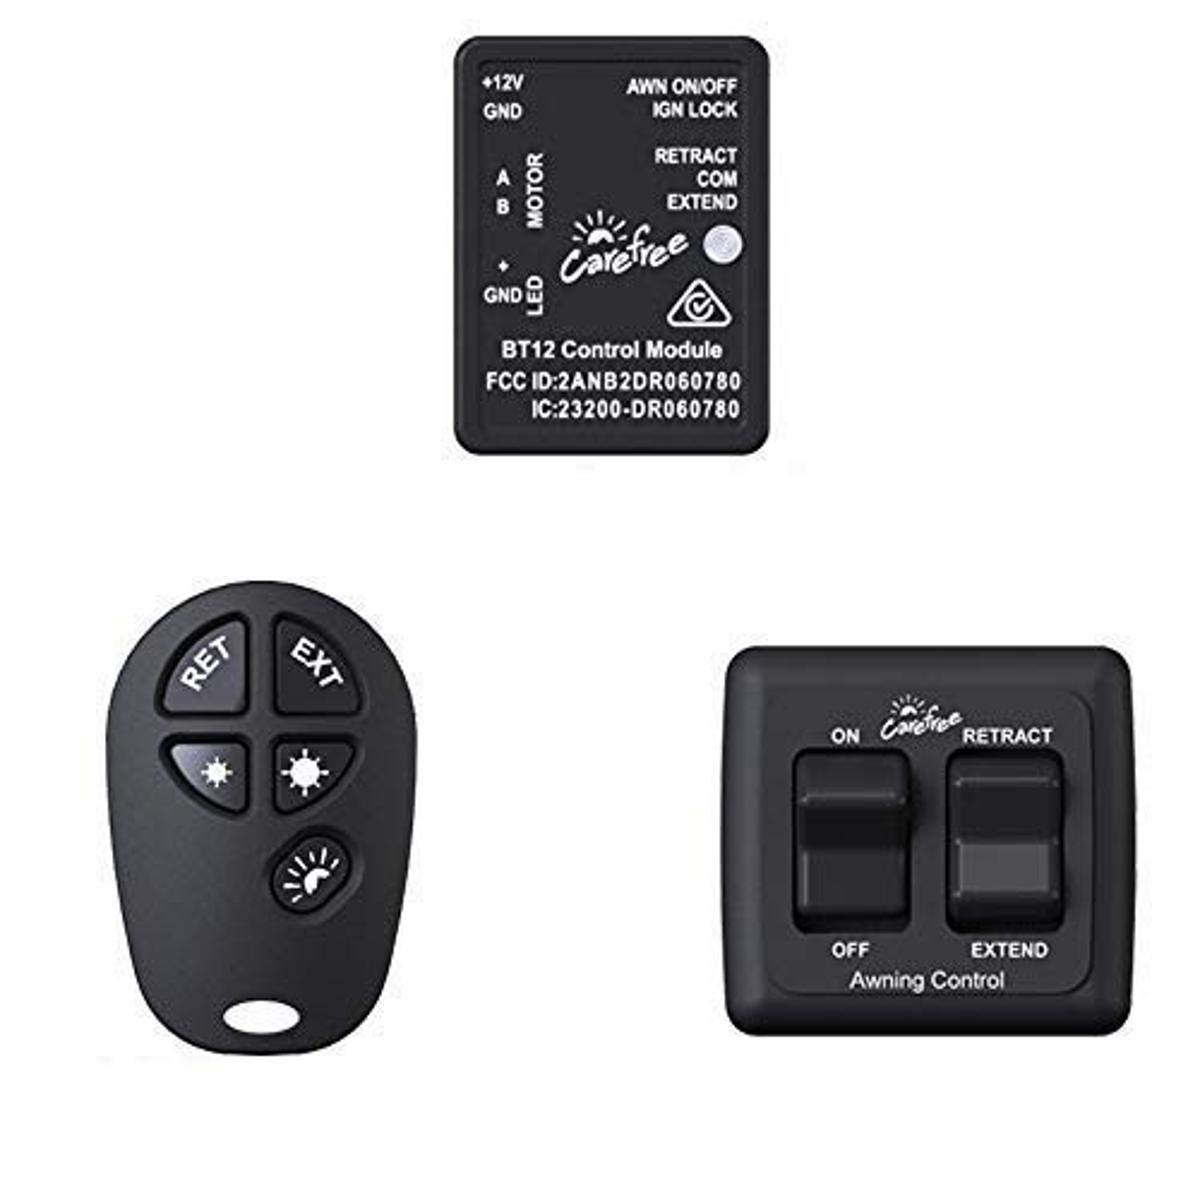 CAREFREE 901600 Connects BT12 Wireless RV Awning Bluetooth Control System with Remote, Black